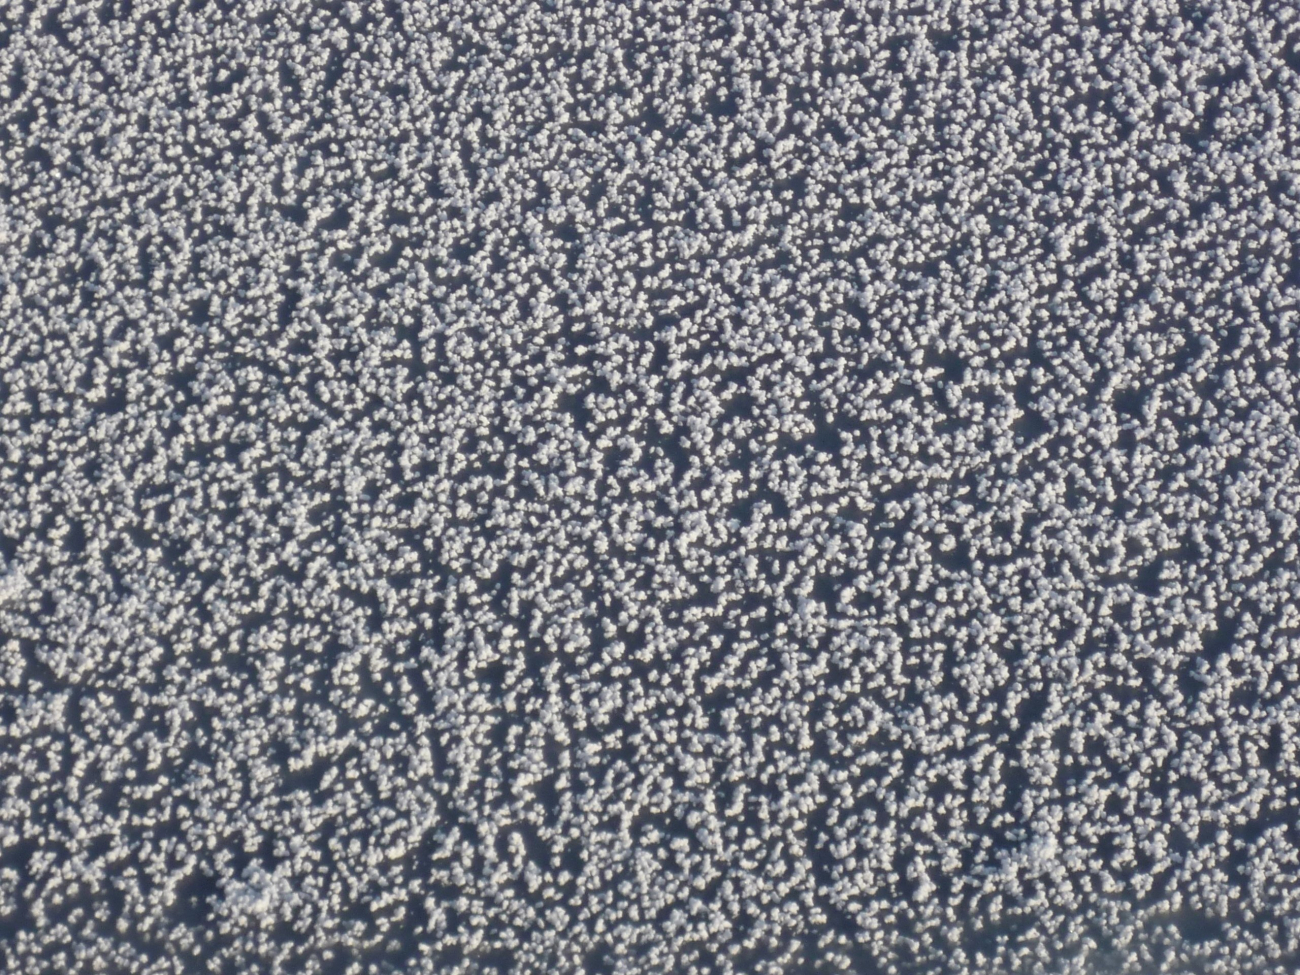 Graupel covering ice surface